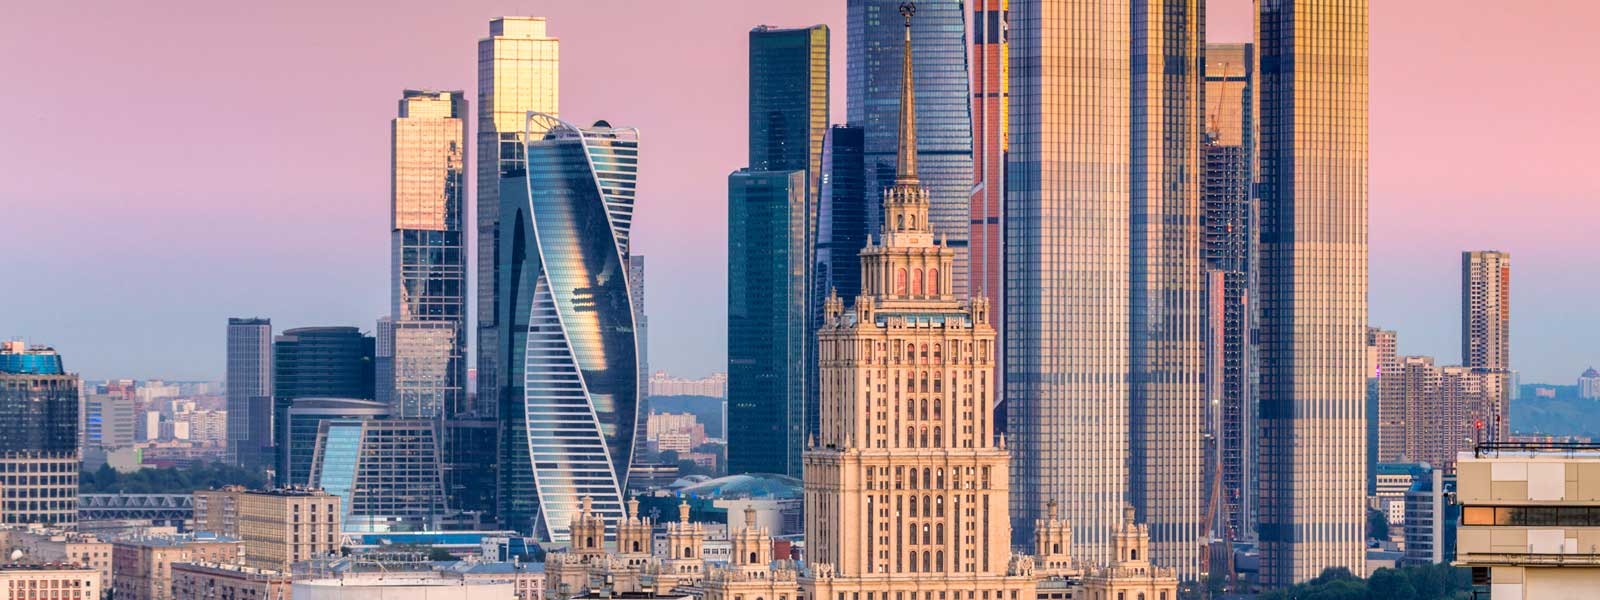 Moscow, Russia